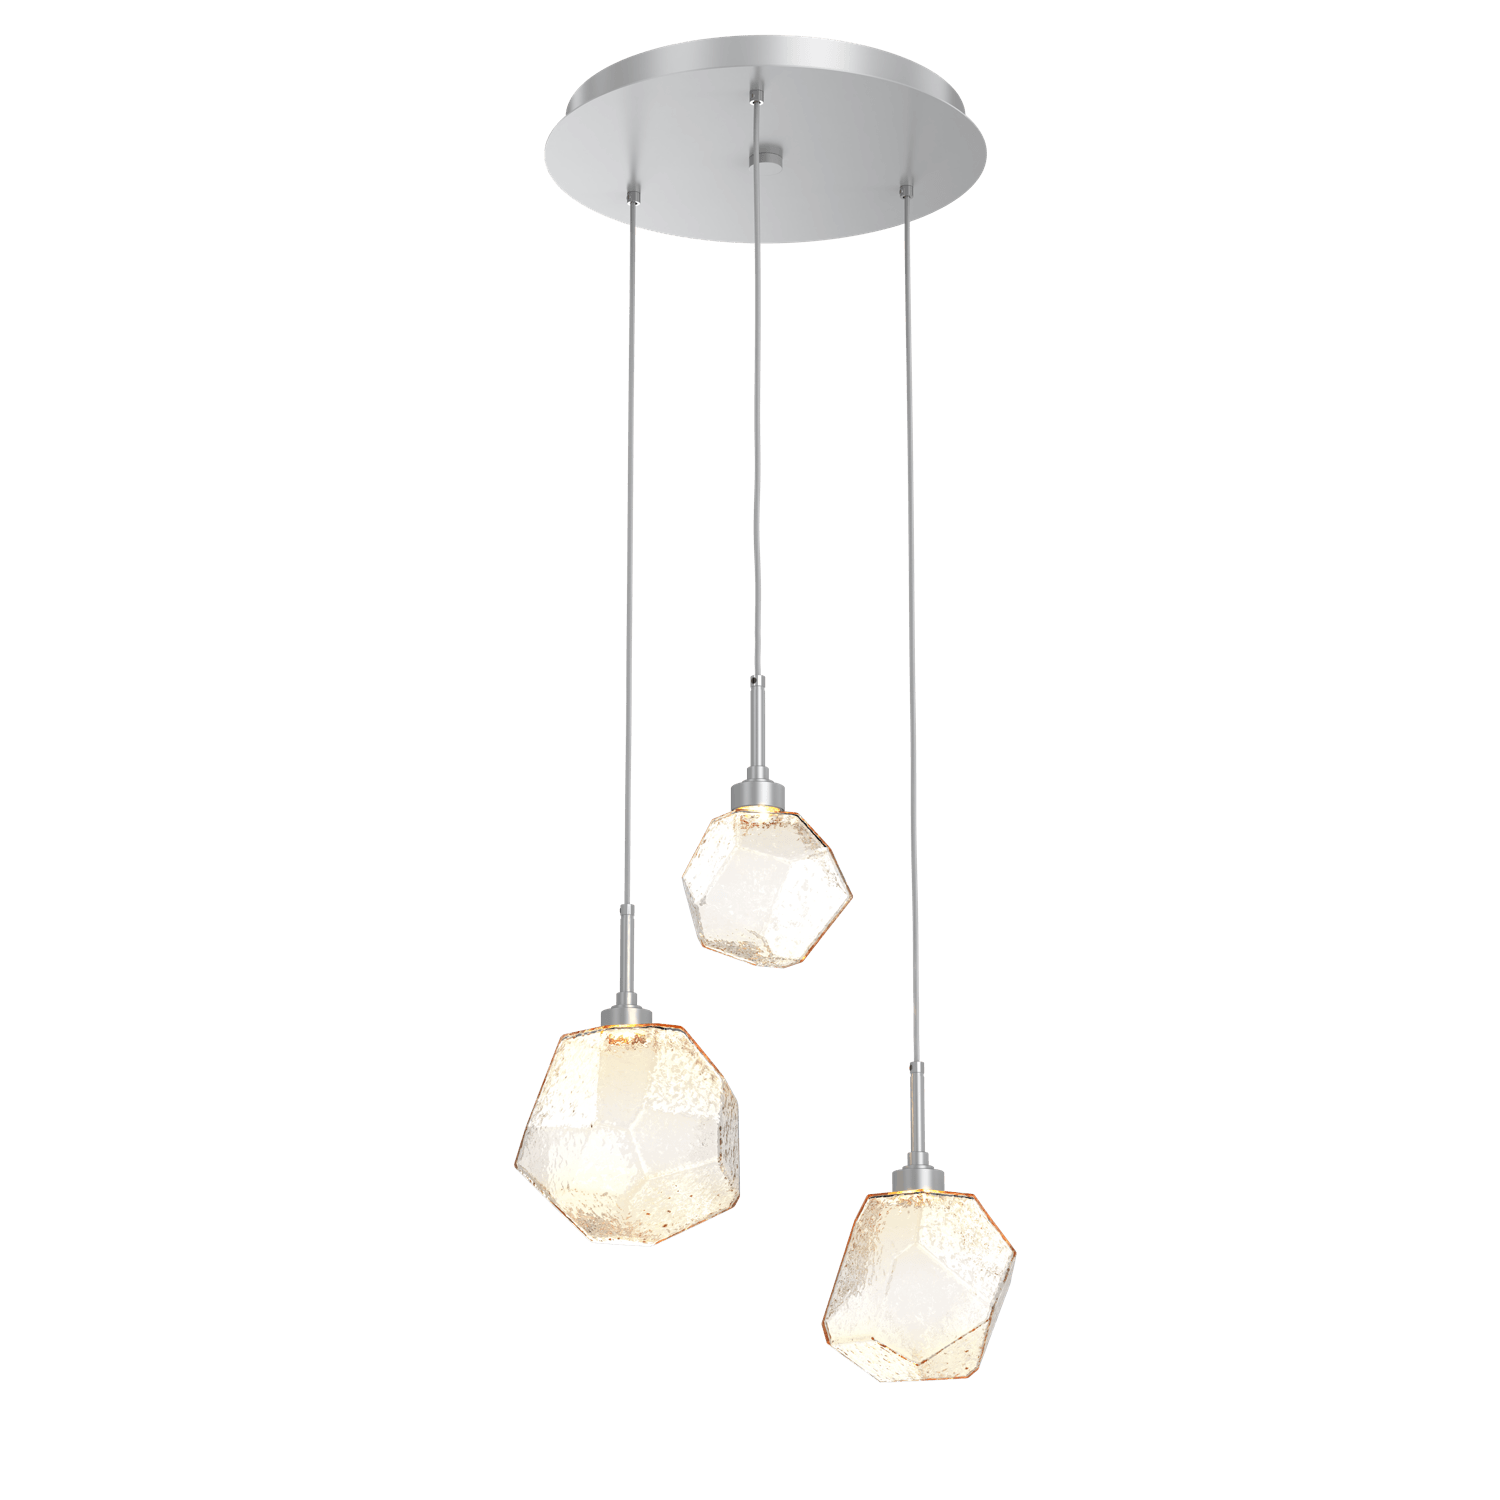 CHB0039-03-CS-A-Hammerton-Studio-Gem-3-light-round-pendant-chandelier-with-classic-silver-finish-and-amber-blown-glass-shades-and-LED-lamping